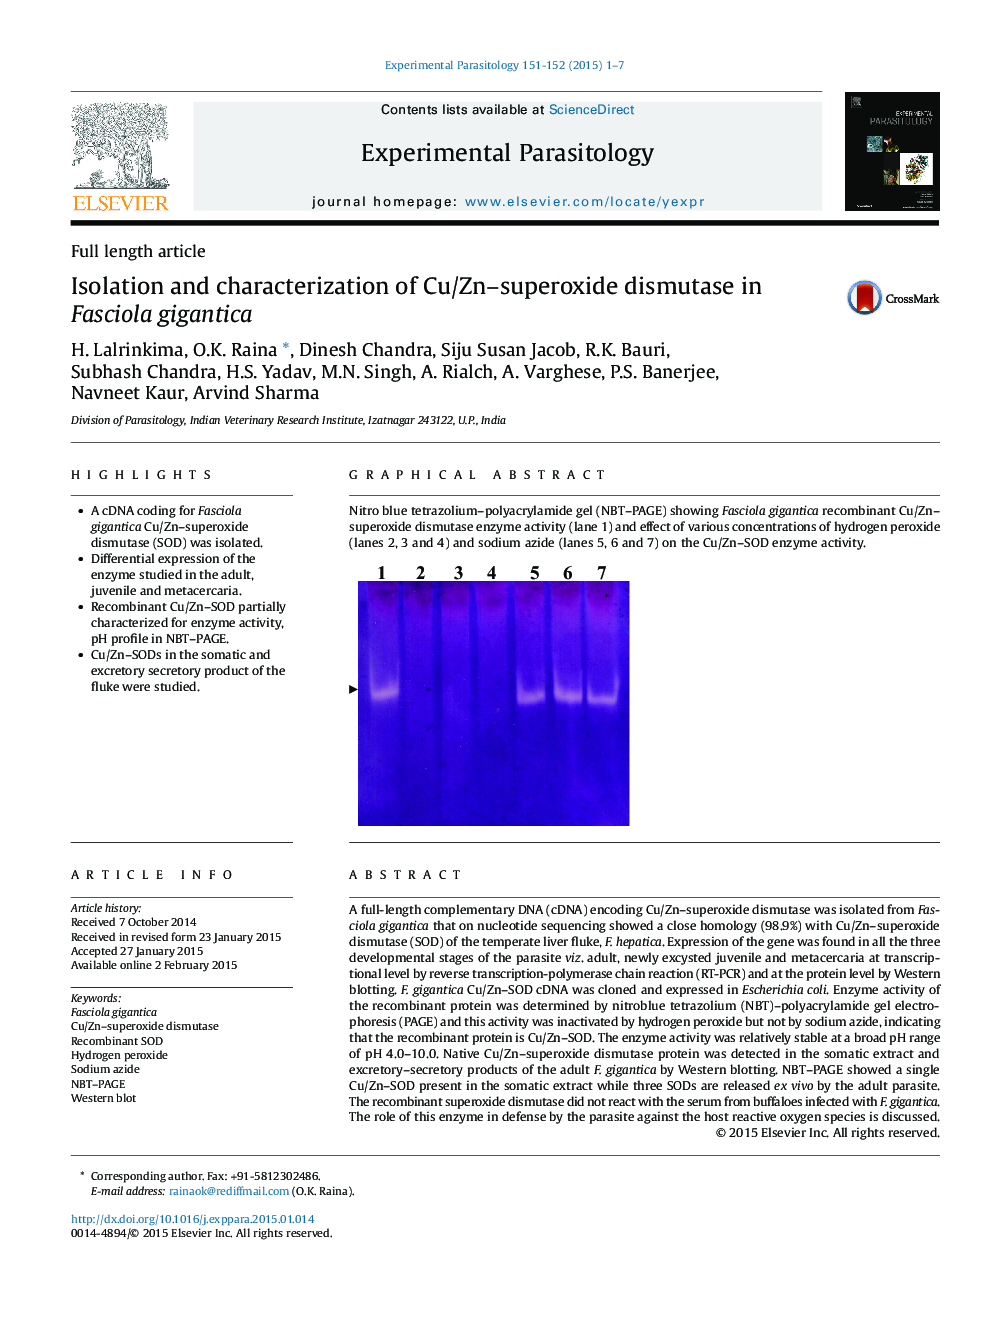 Isolation and characterization of Cu/Zn–superoxide dismutase in Fasciola gigantica